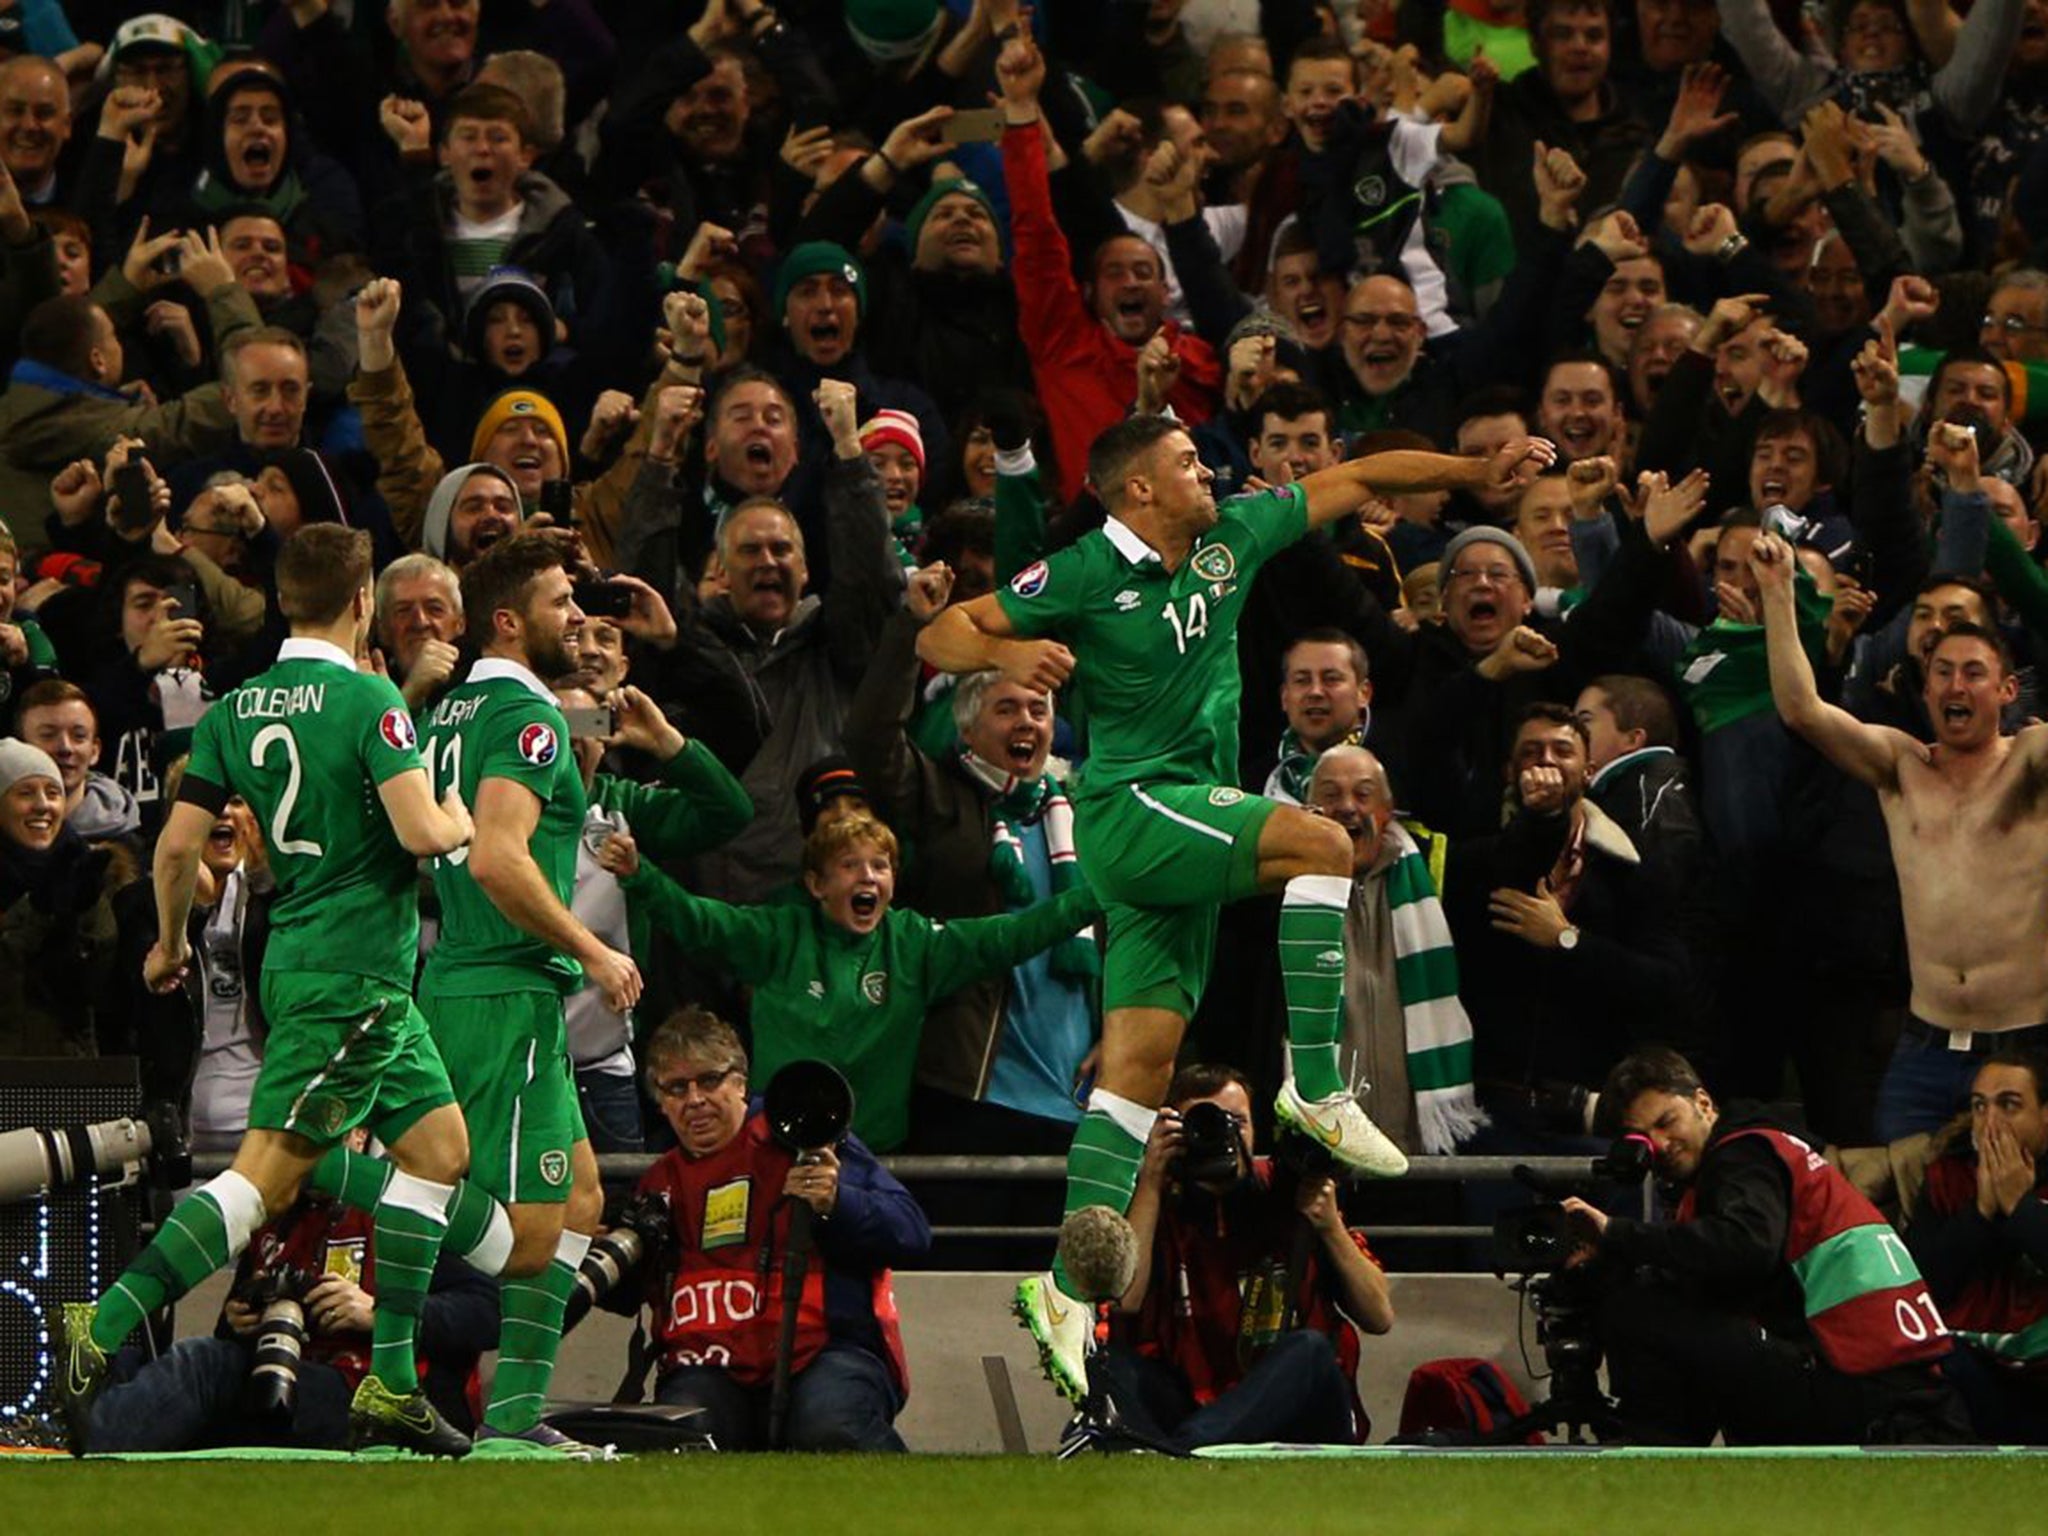 Jonathan Walters celebrates after giving Ireland the lead